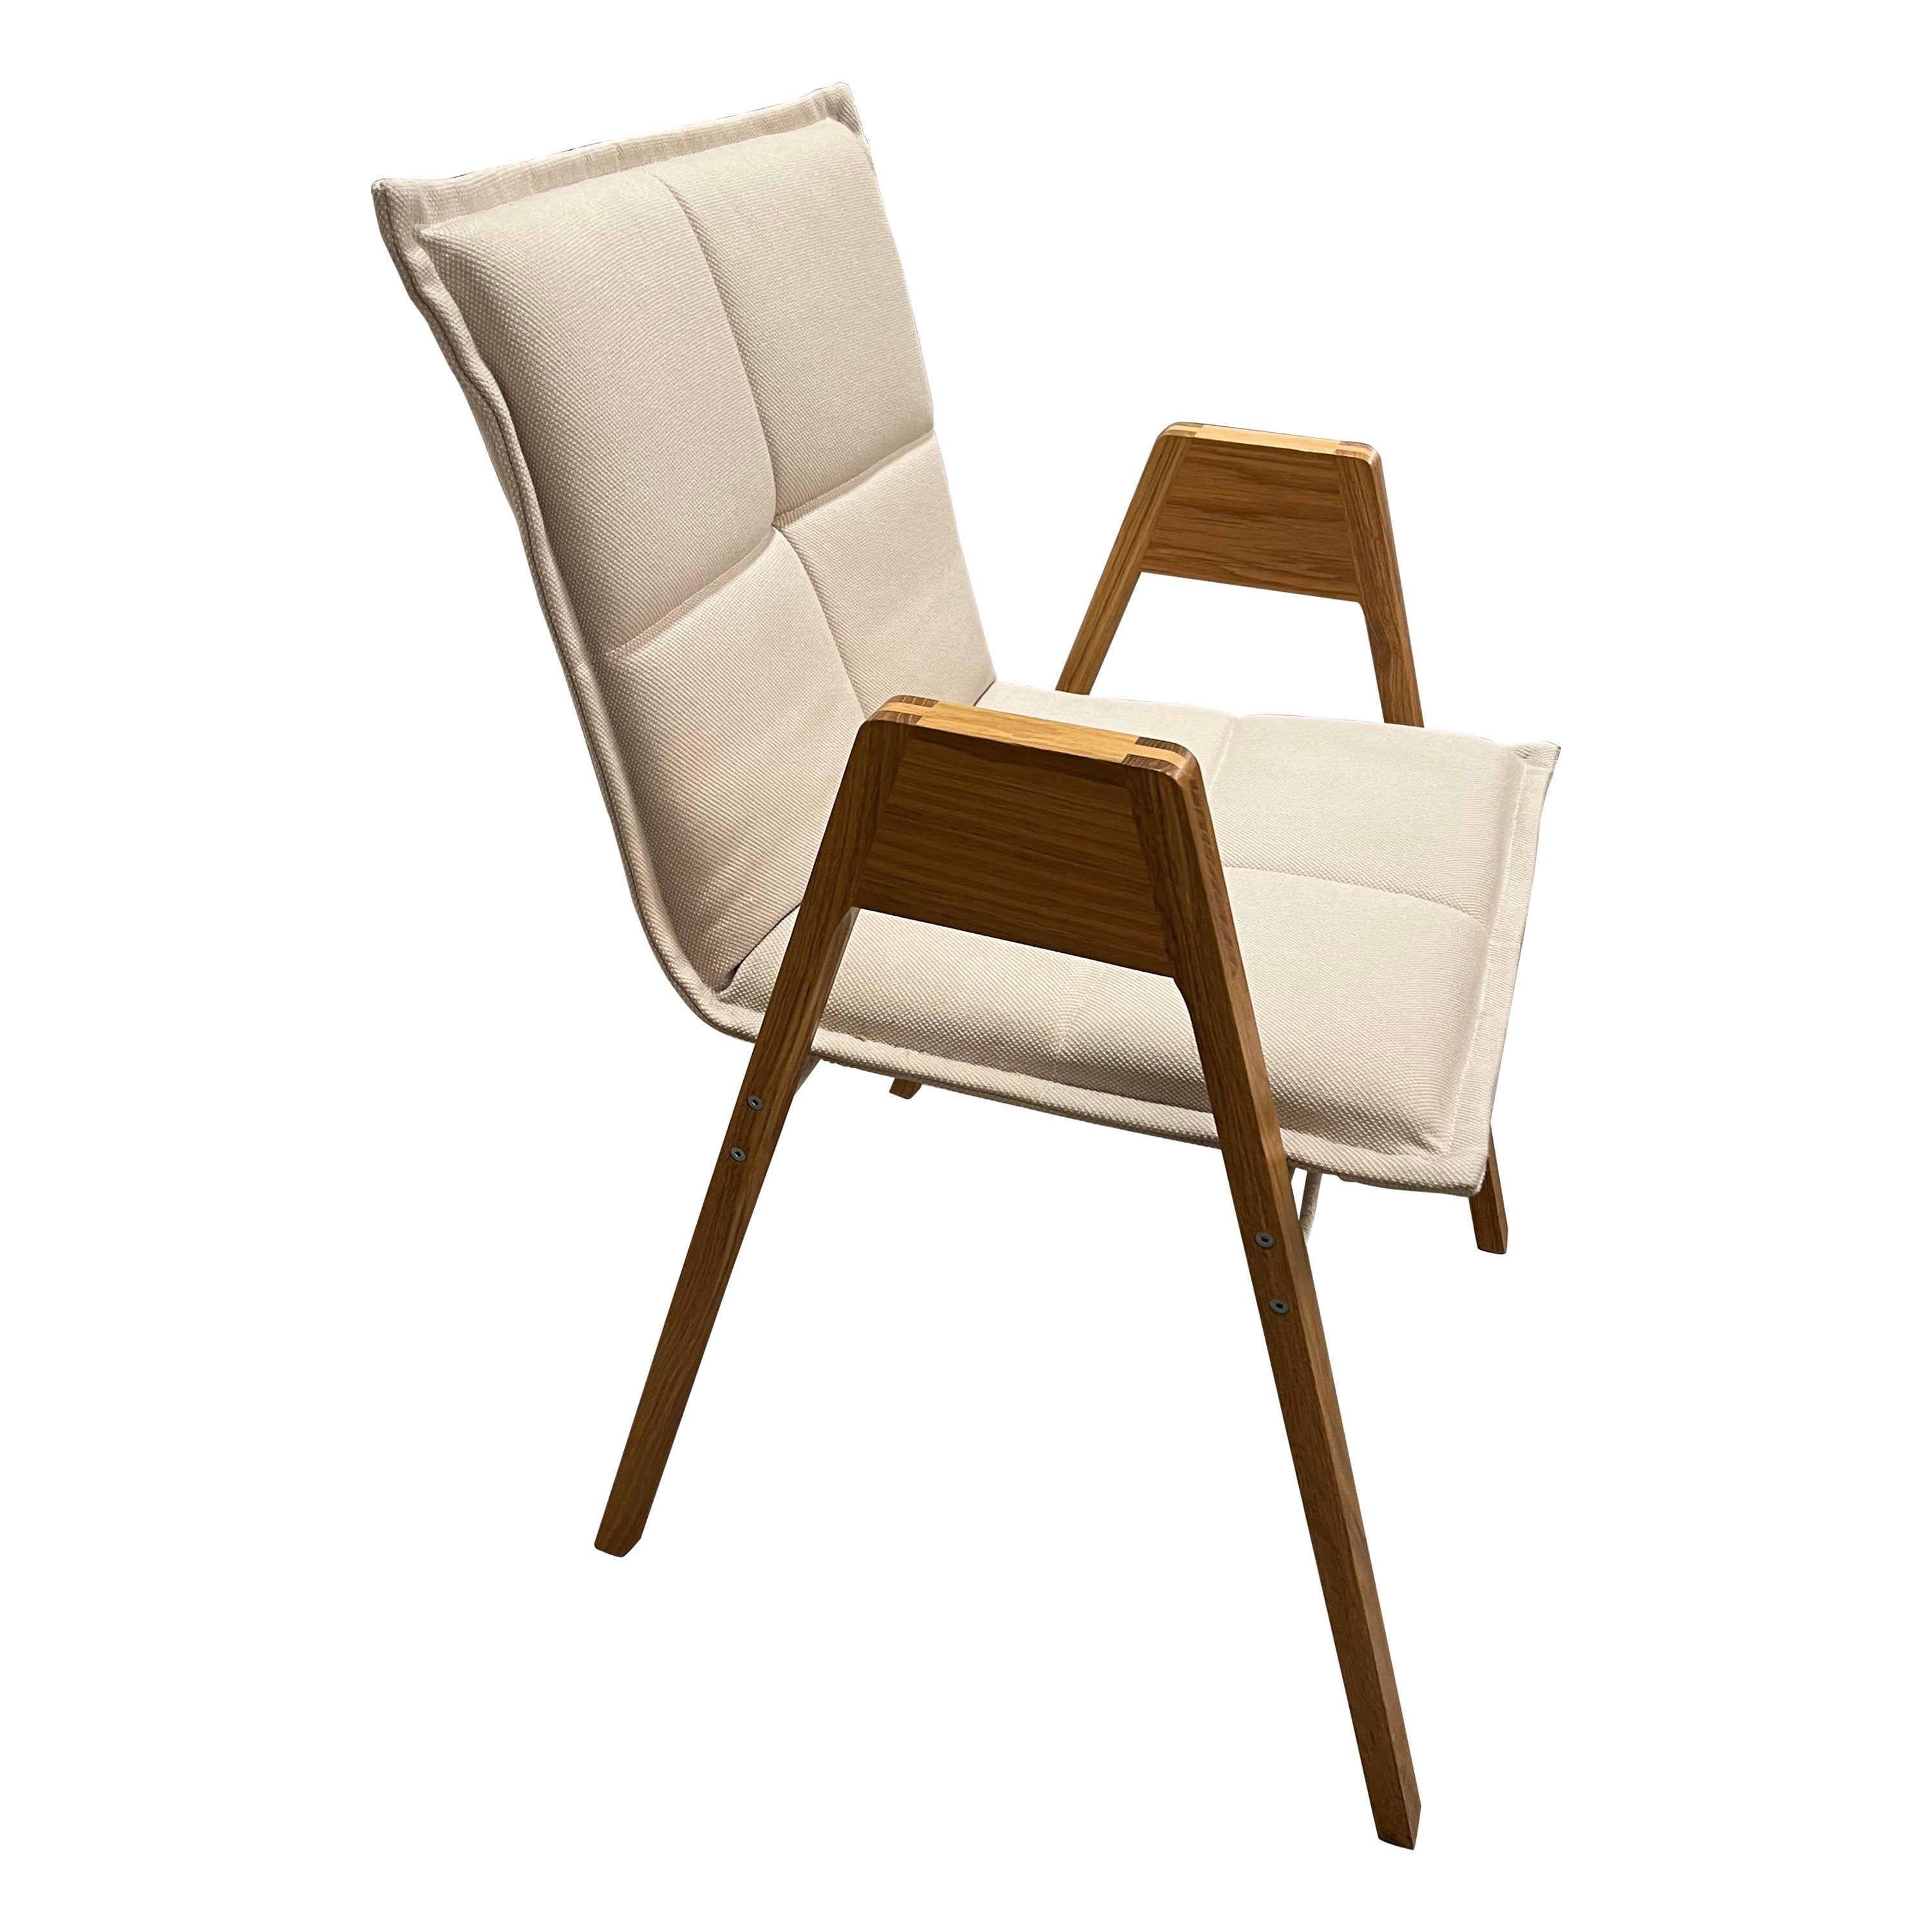 Inno Lab Armchair with Wood Frame in STOCK